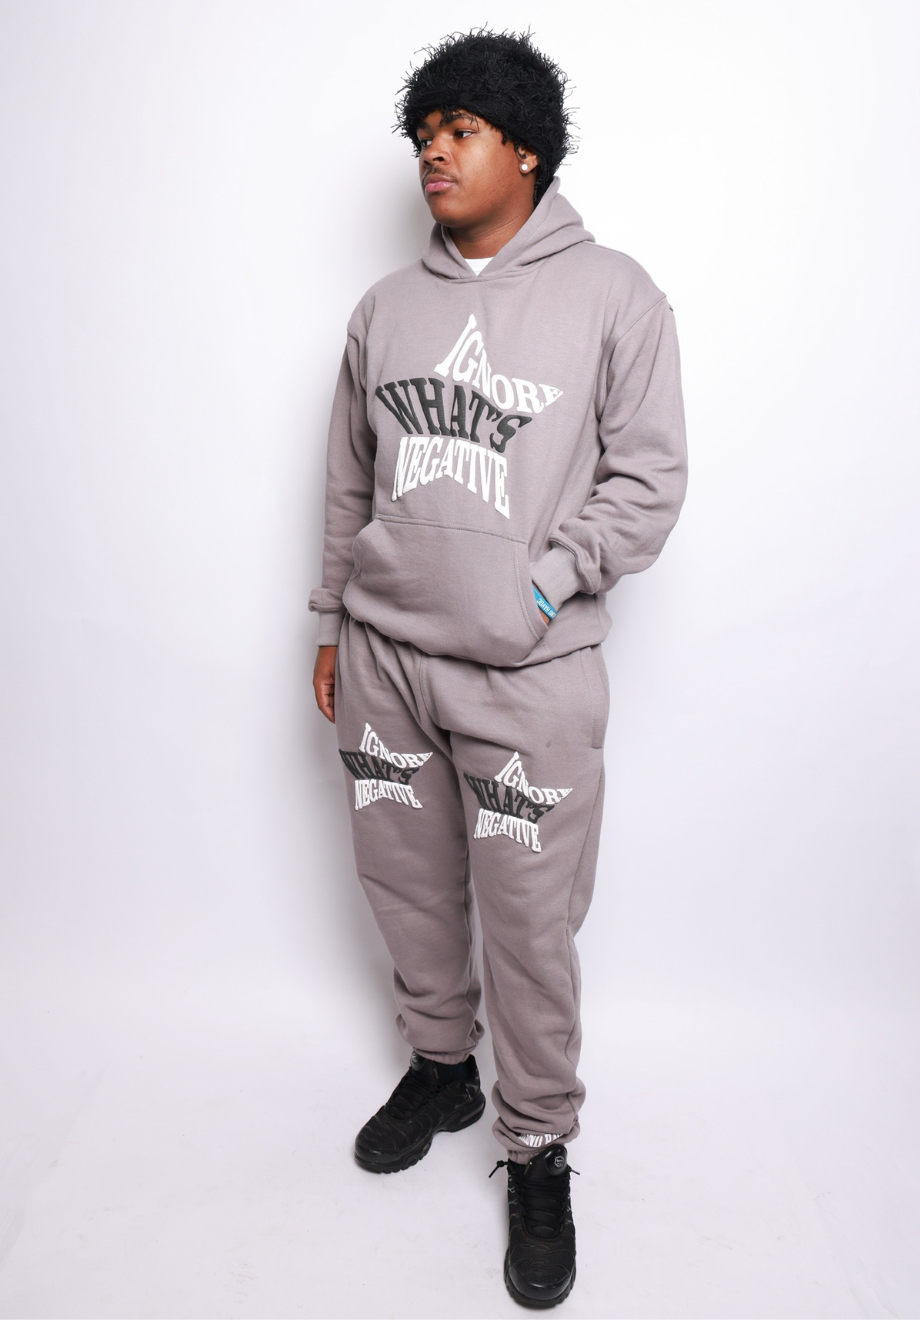 'Ignore Whats Negative' Star Hoodie [Grey]